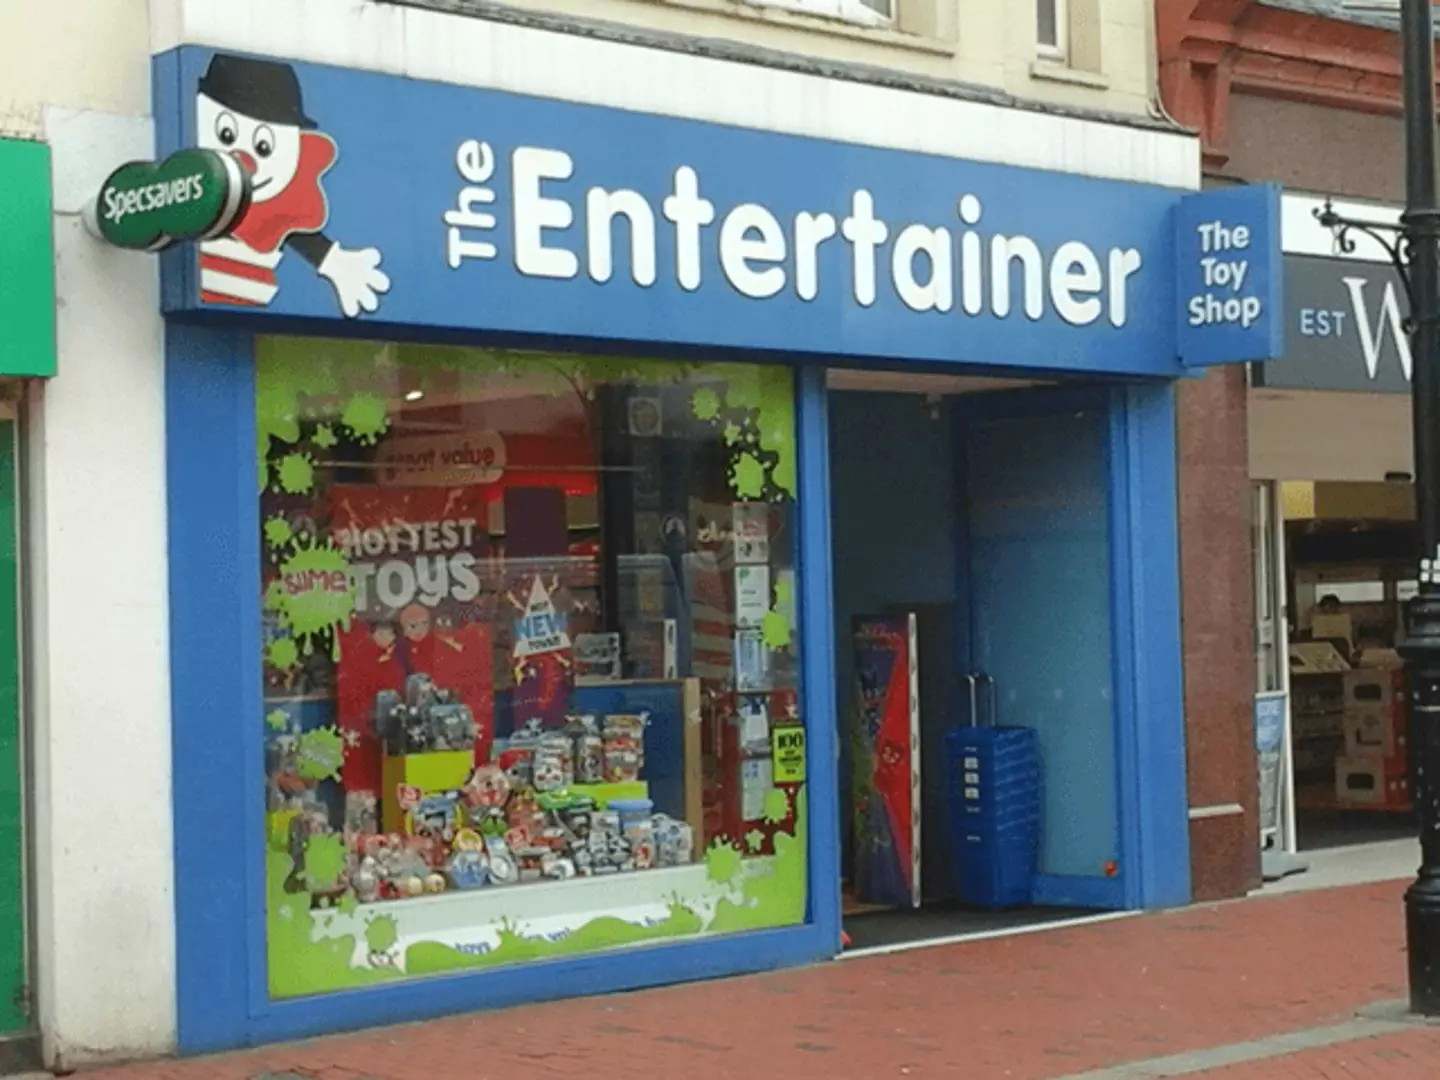 The incident occurred outside The Entertainer toy store in Reading, Berkshire.